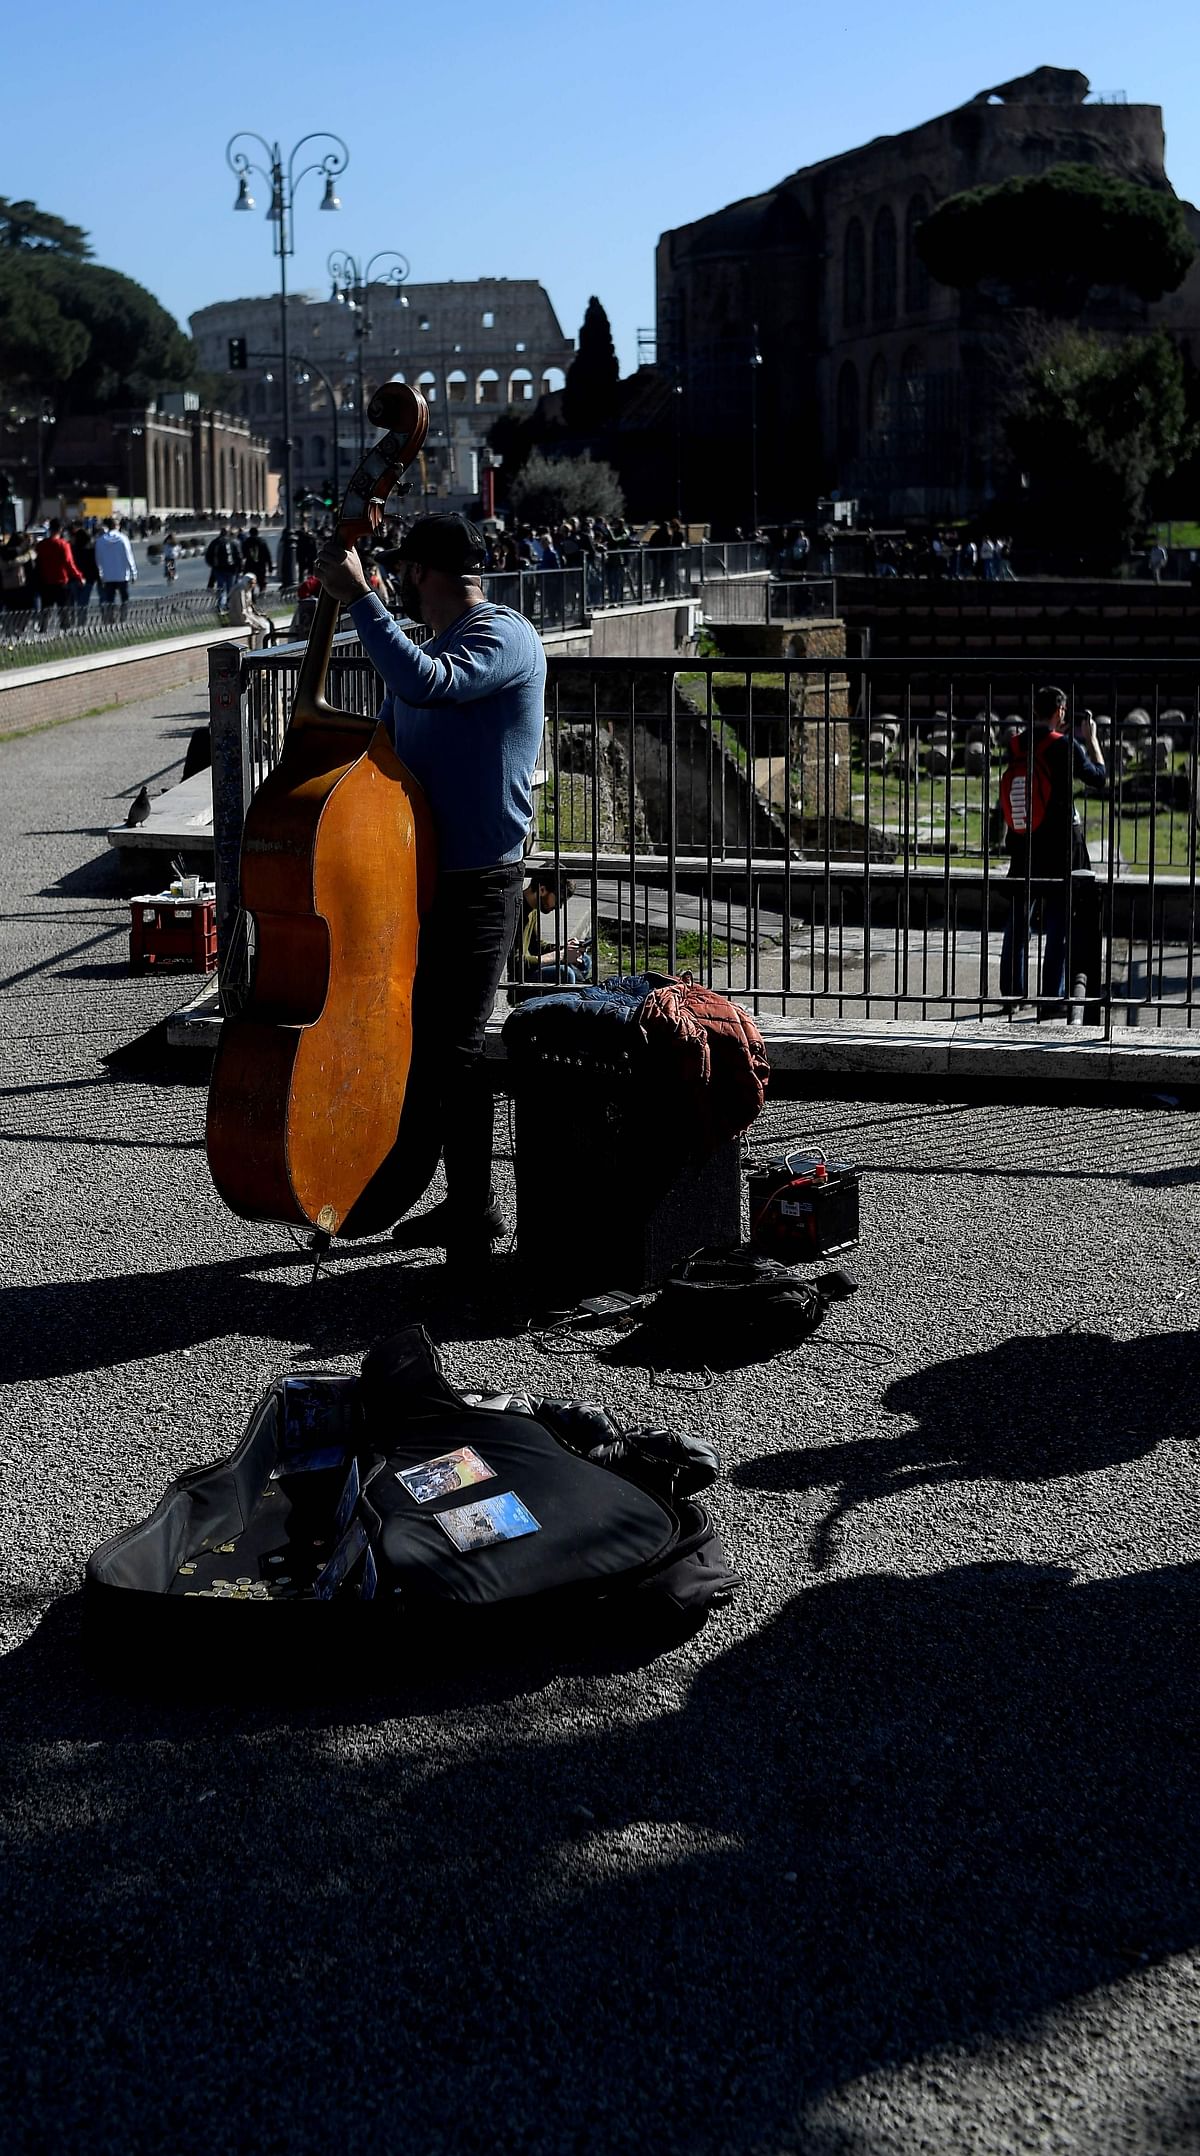 A street musician plays a double bass by the ancient Roman Forum in Rome on 21 February 2020 within the presentation of an ancient tomb thought to belong to Rome`s founder Romulus, discovered under the Forum in the heart of Italy`s capital decades ago. Photo: AFP